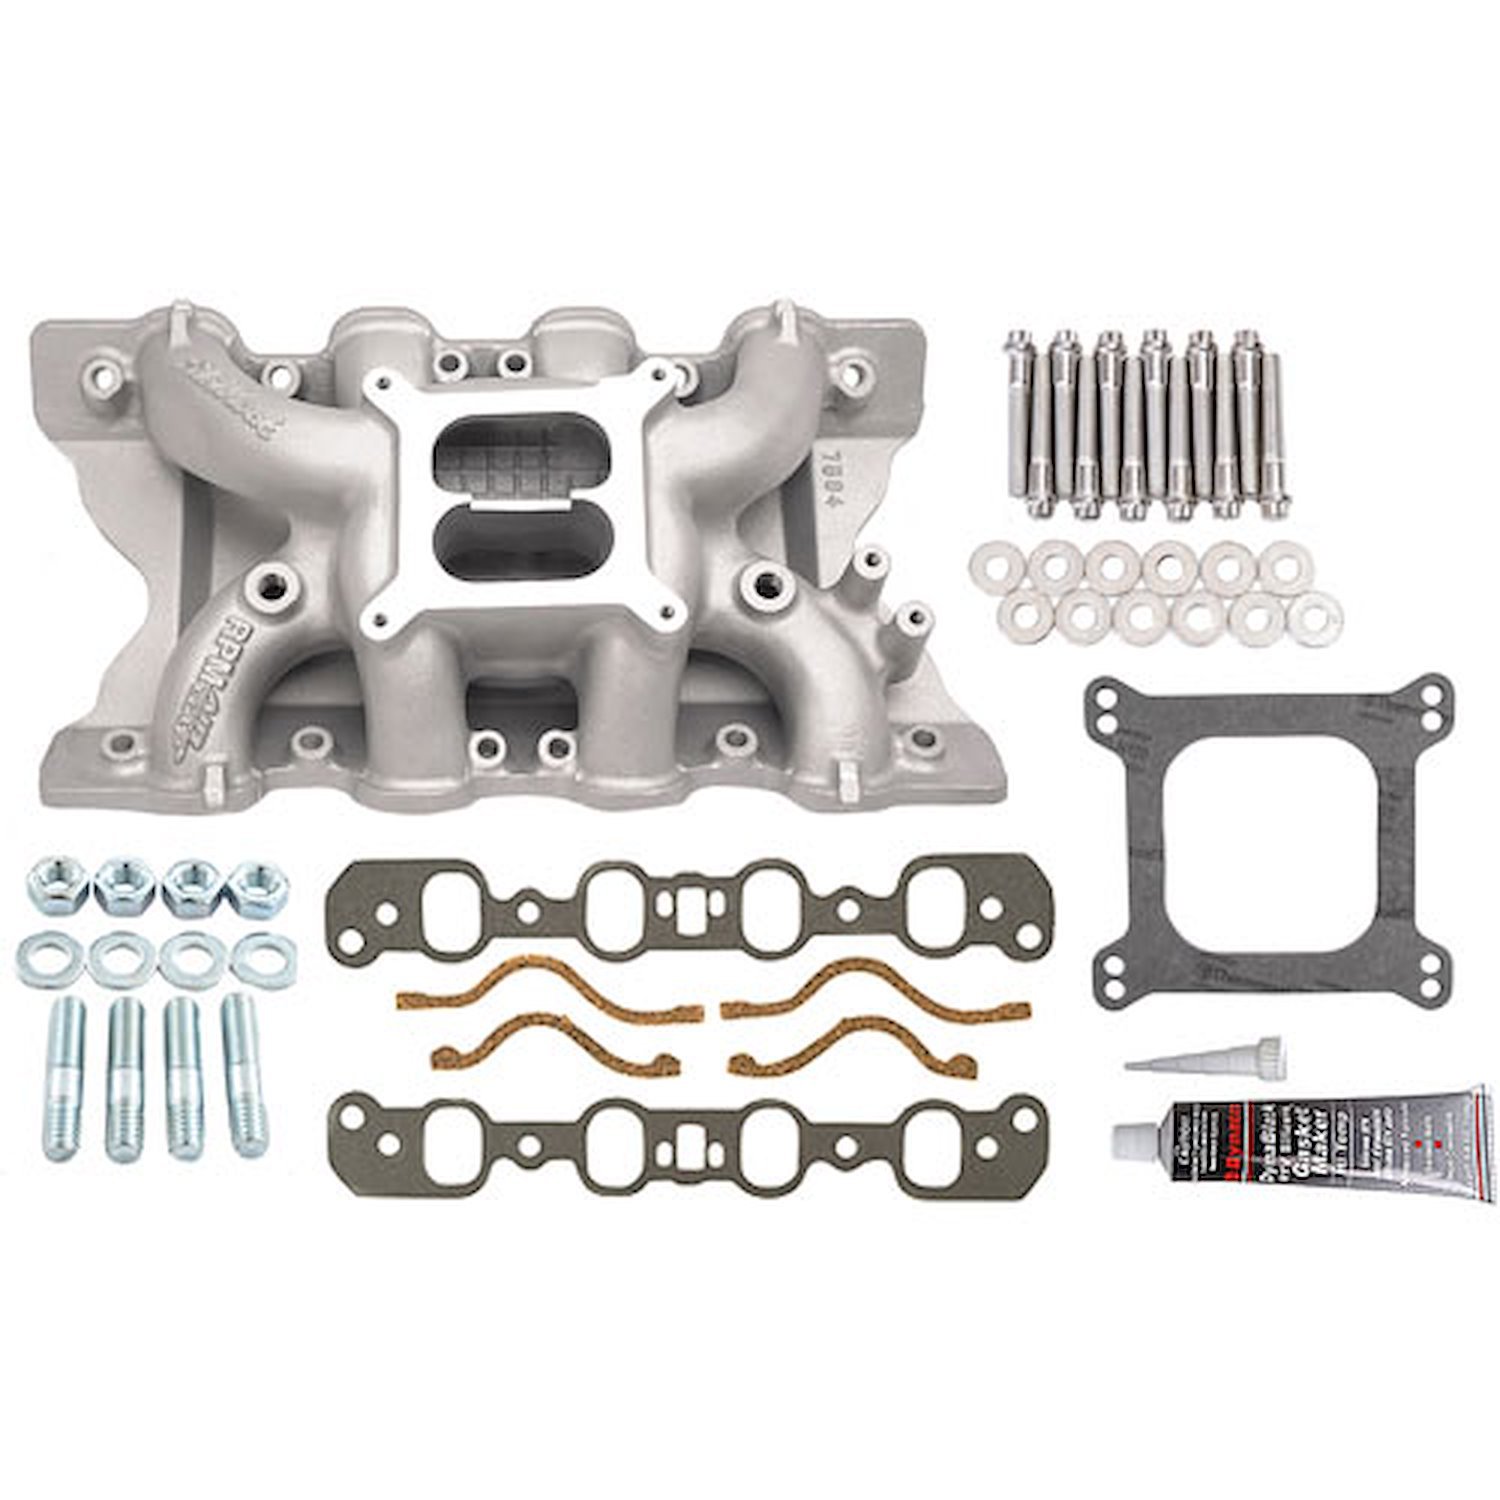 RPM Air-Gap 351C Ford Intake Manifold with Installation Kit